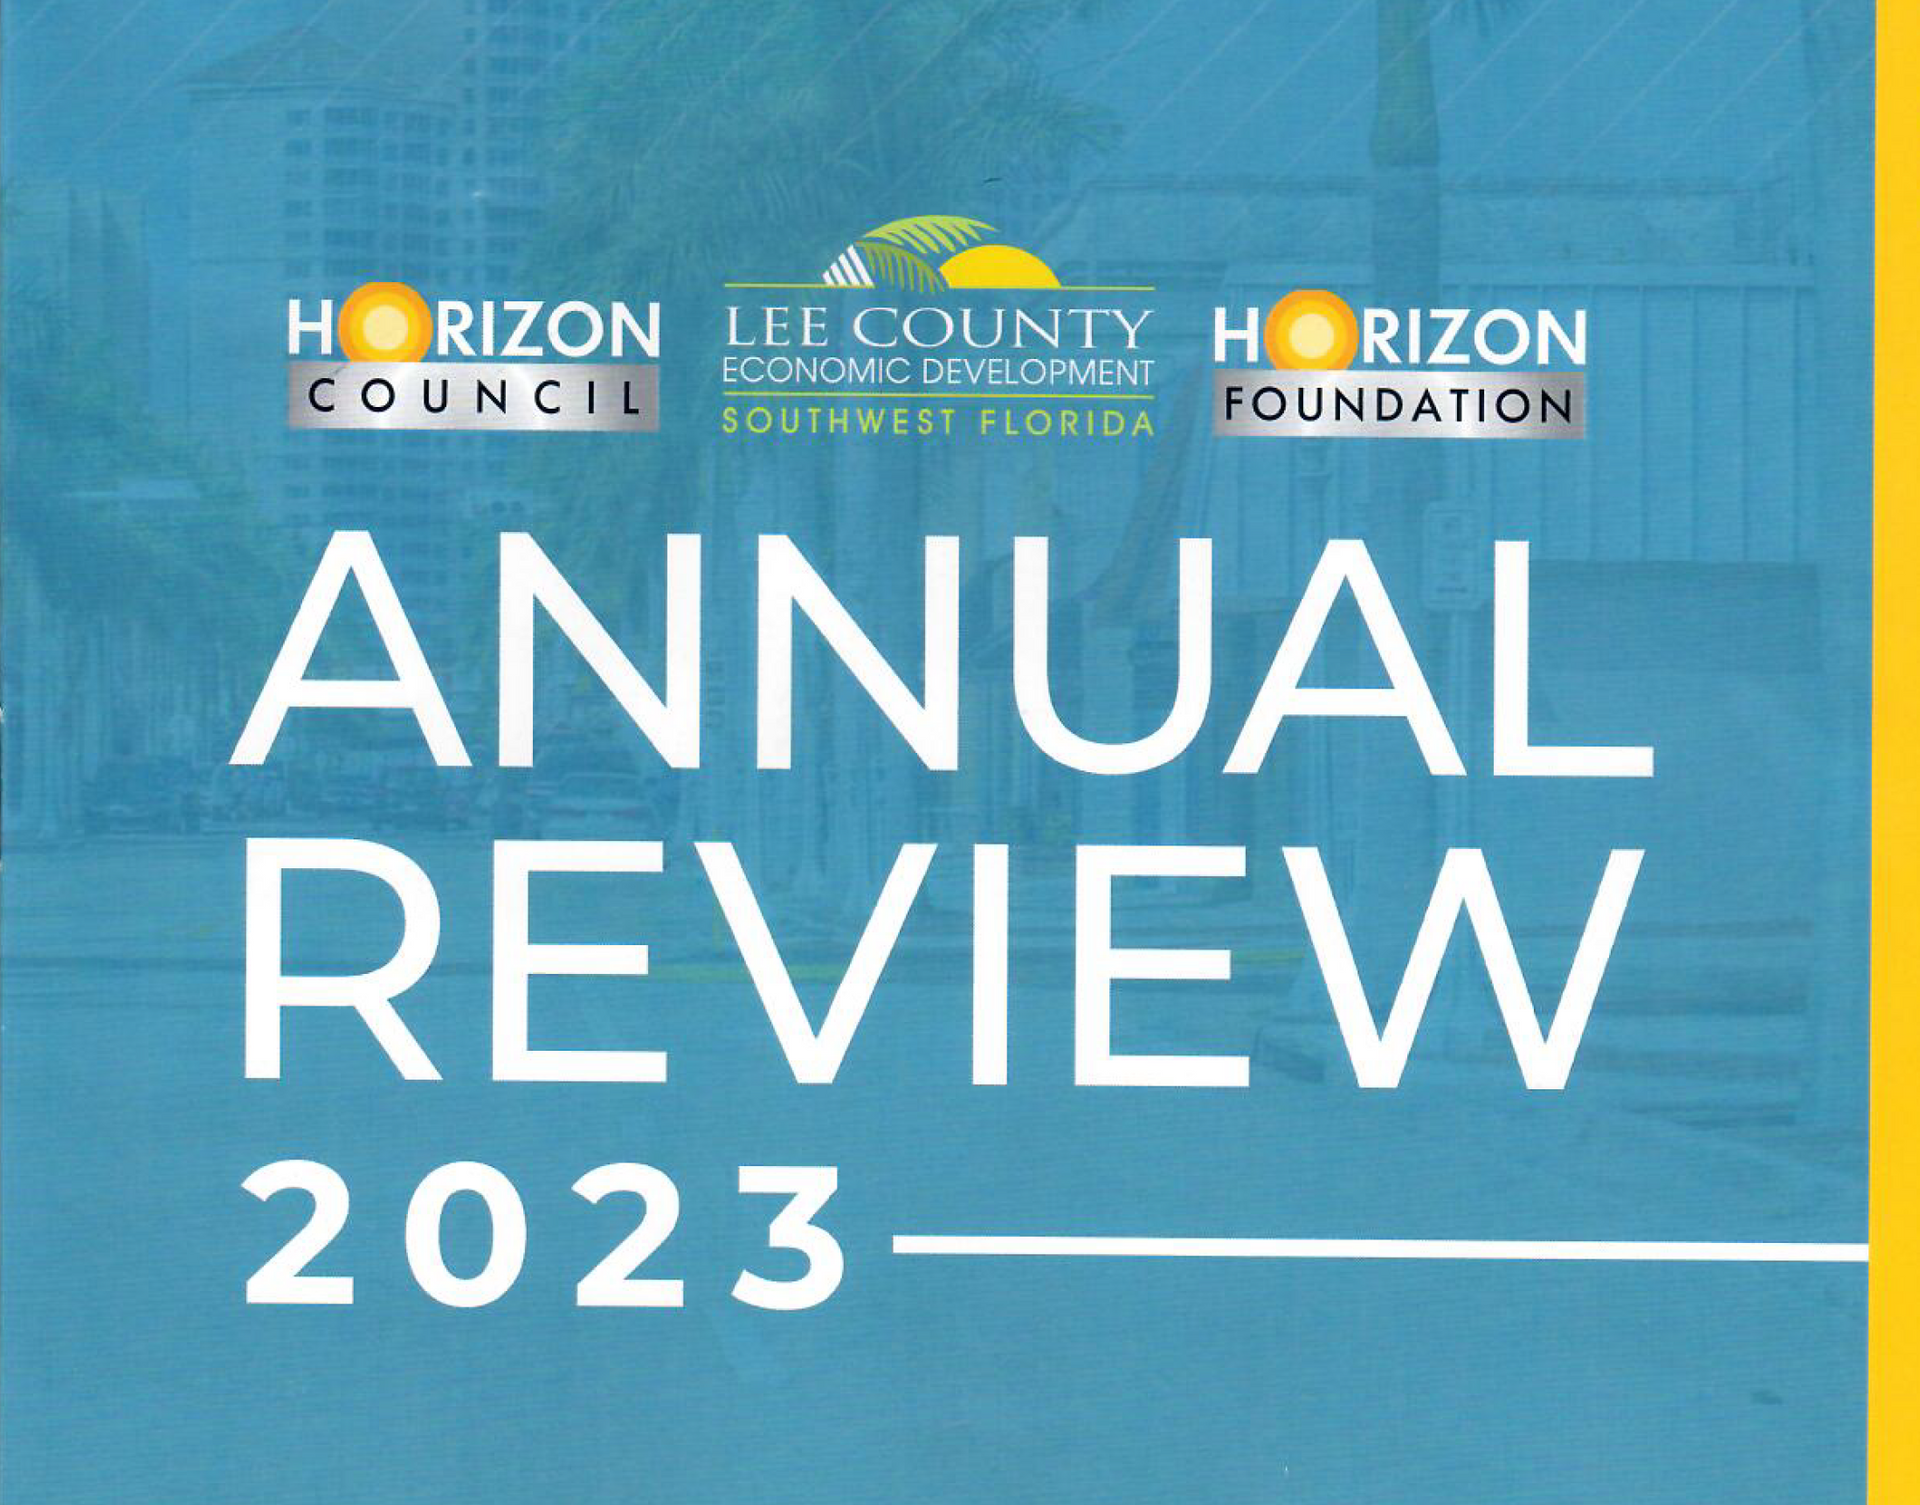 Lee County Horizon Council Annual Review